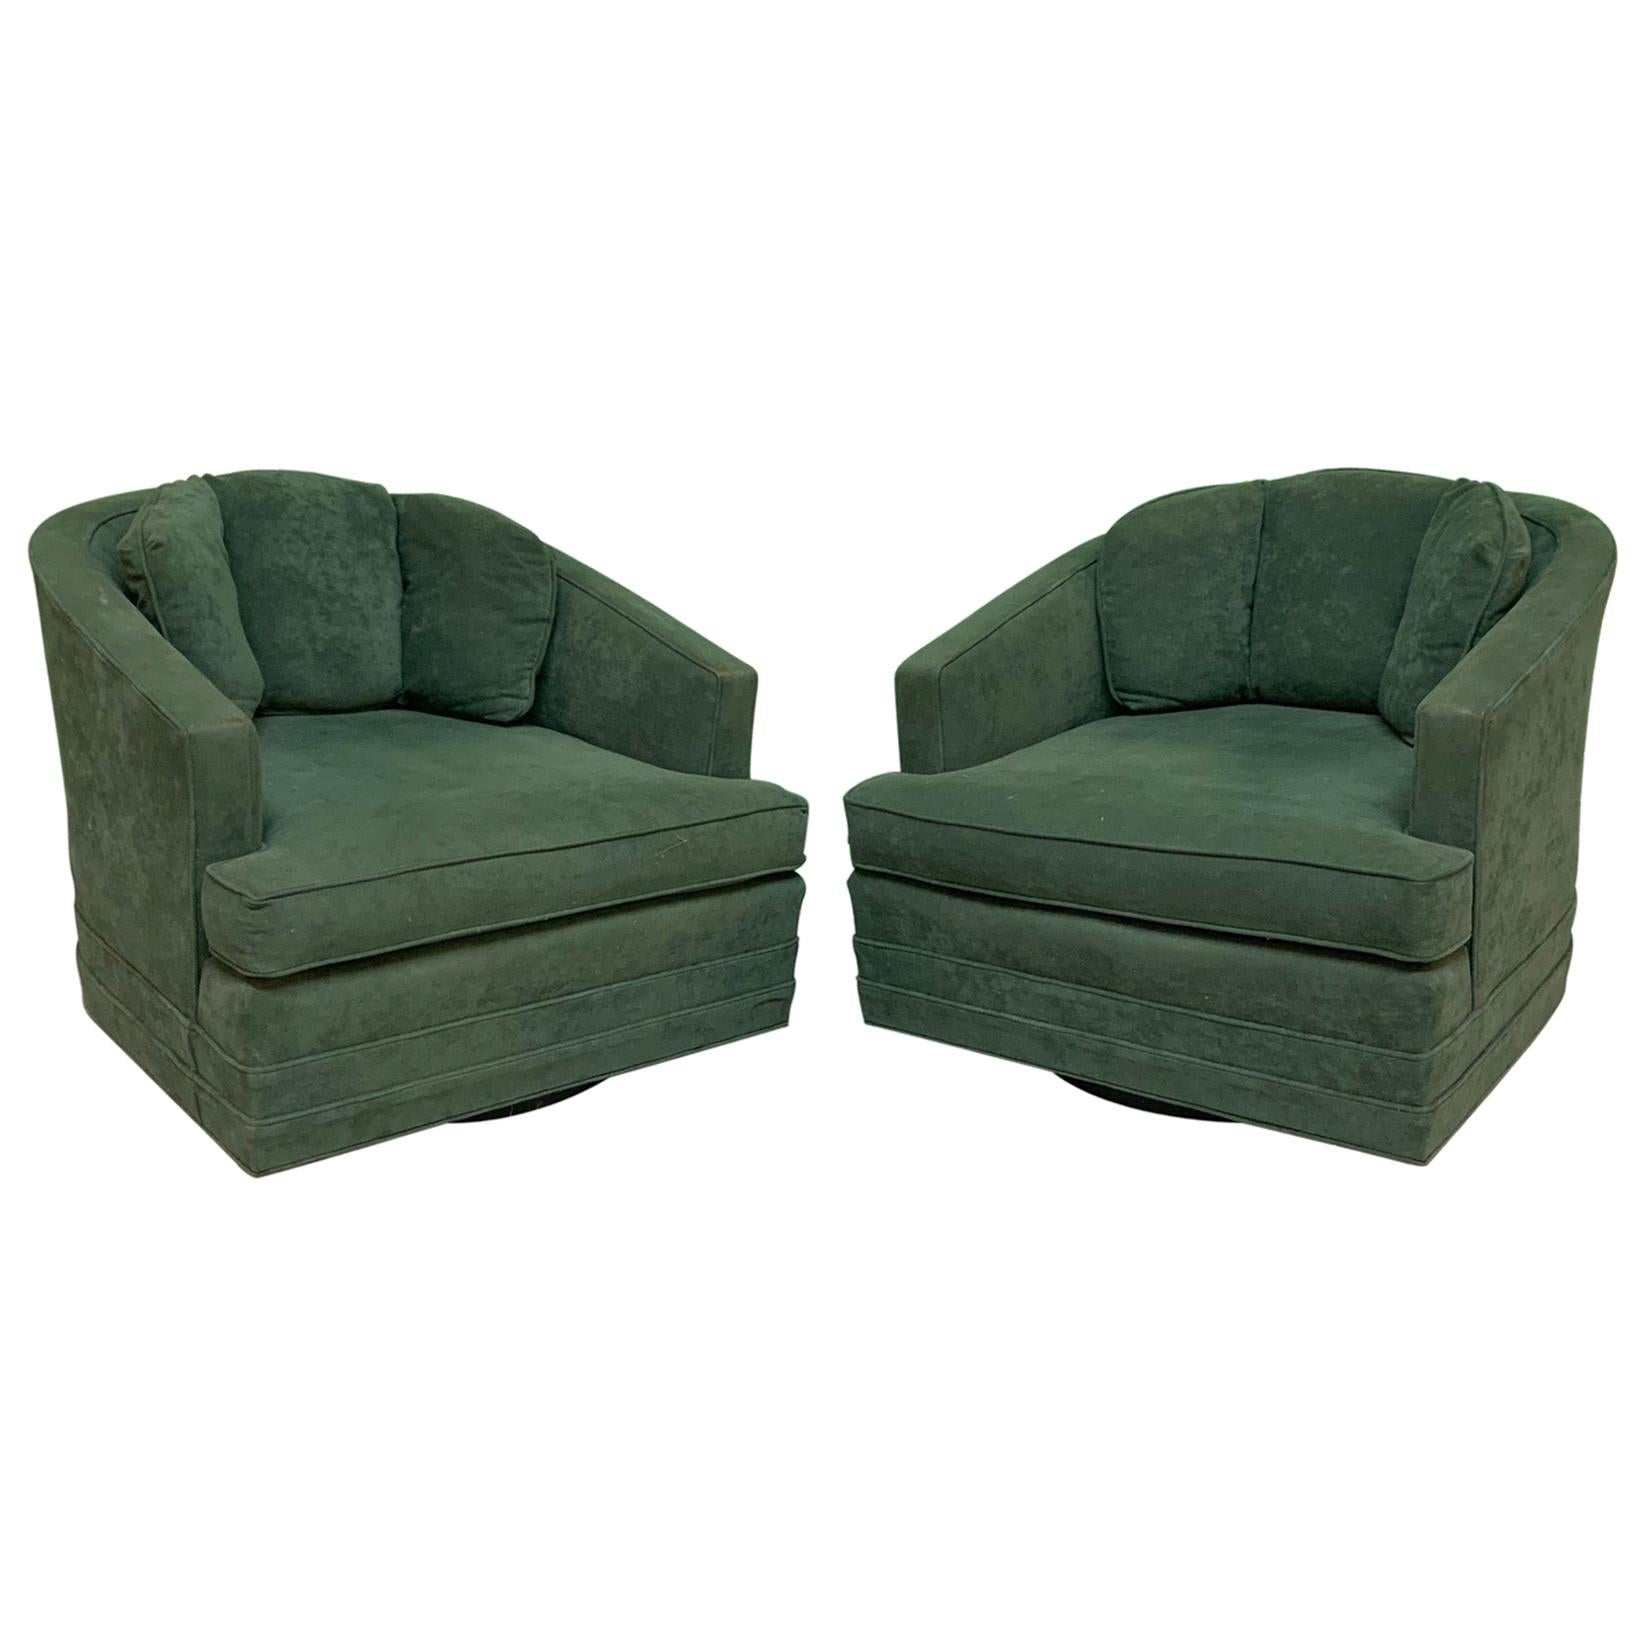 Midcentury Swivel Club Chairs by Kaylyn, a Pair